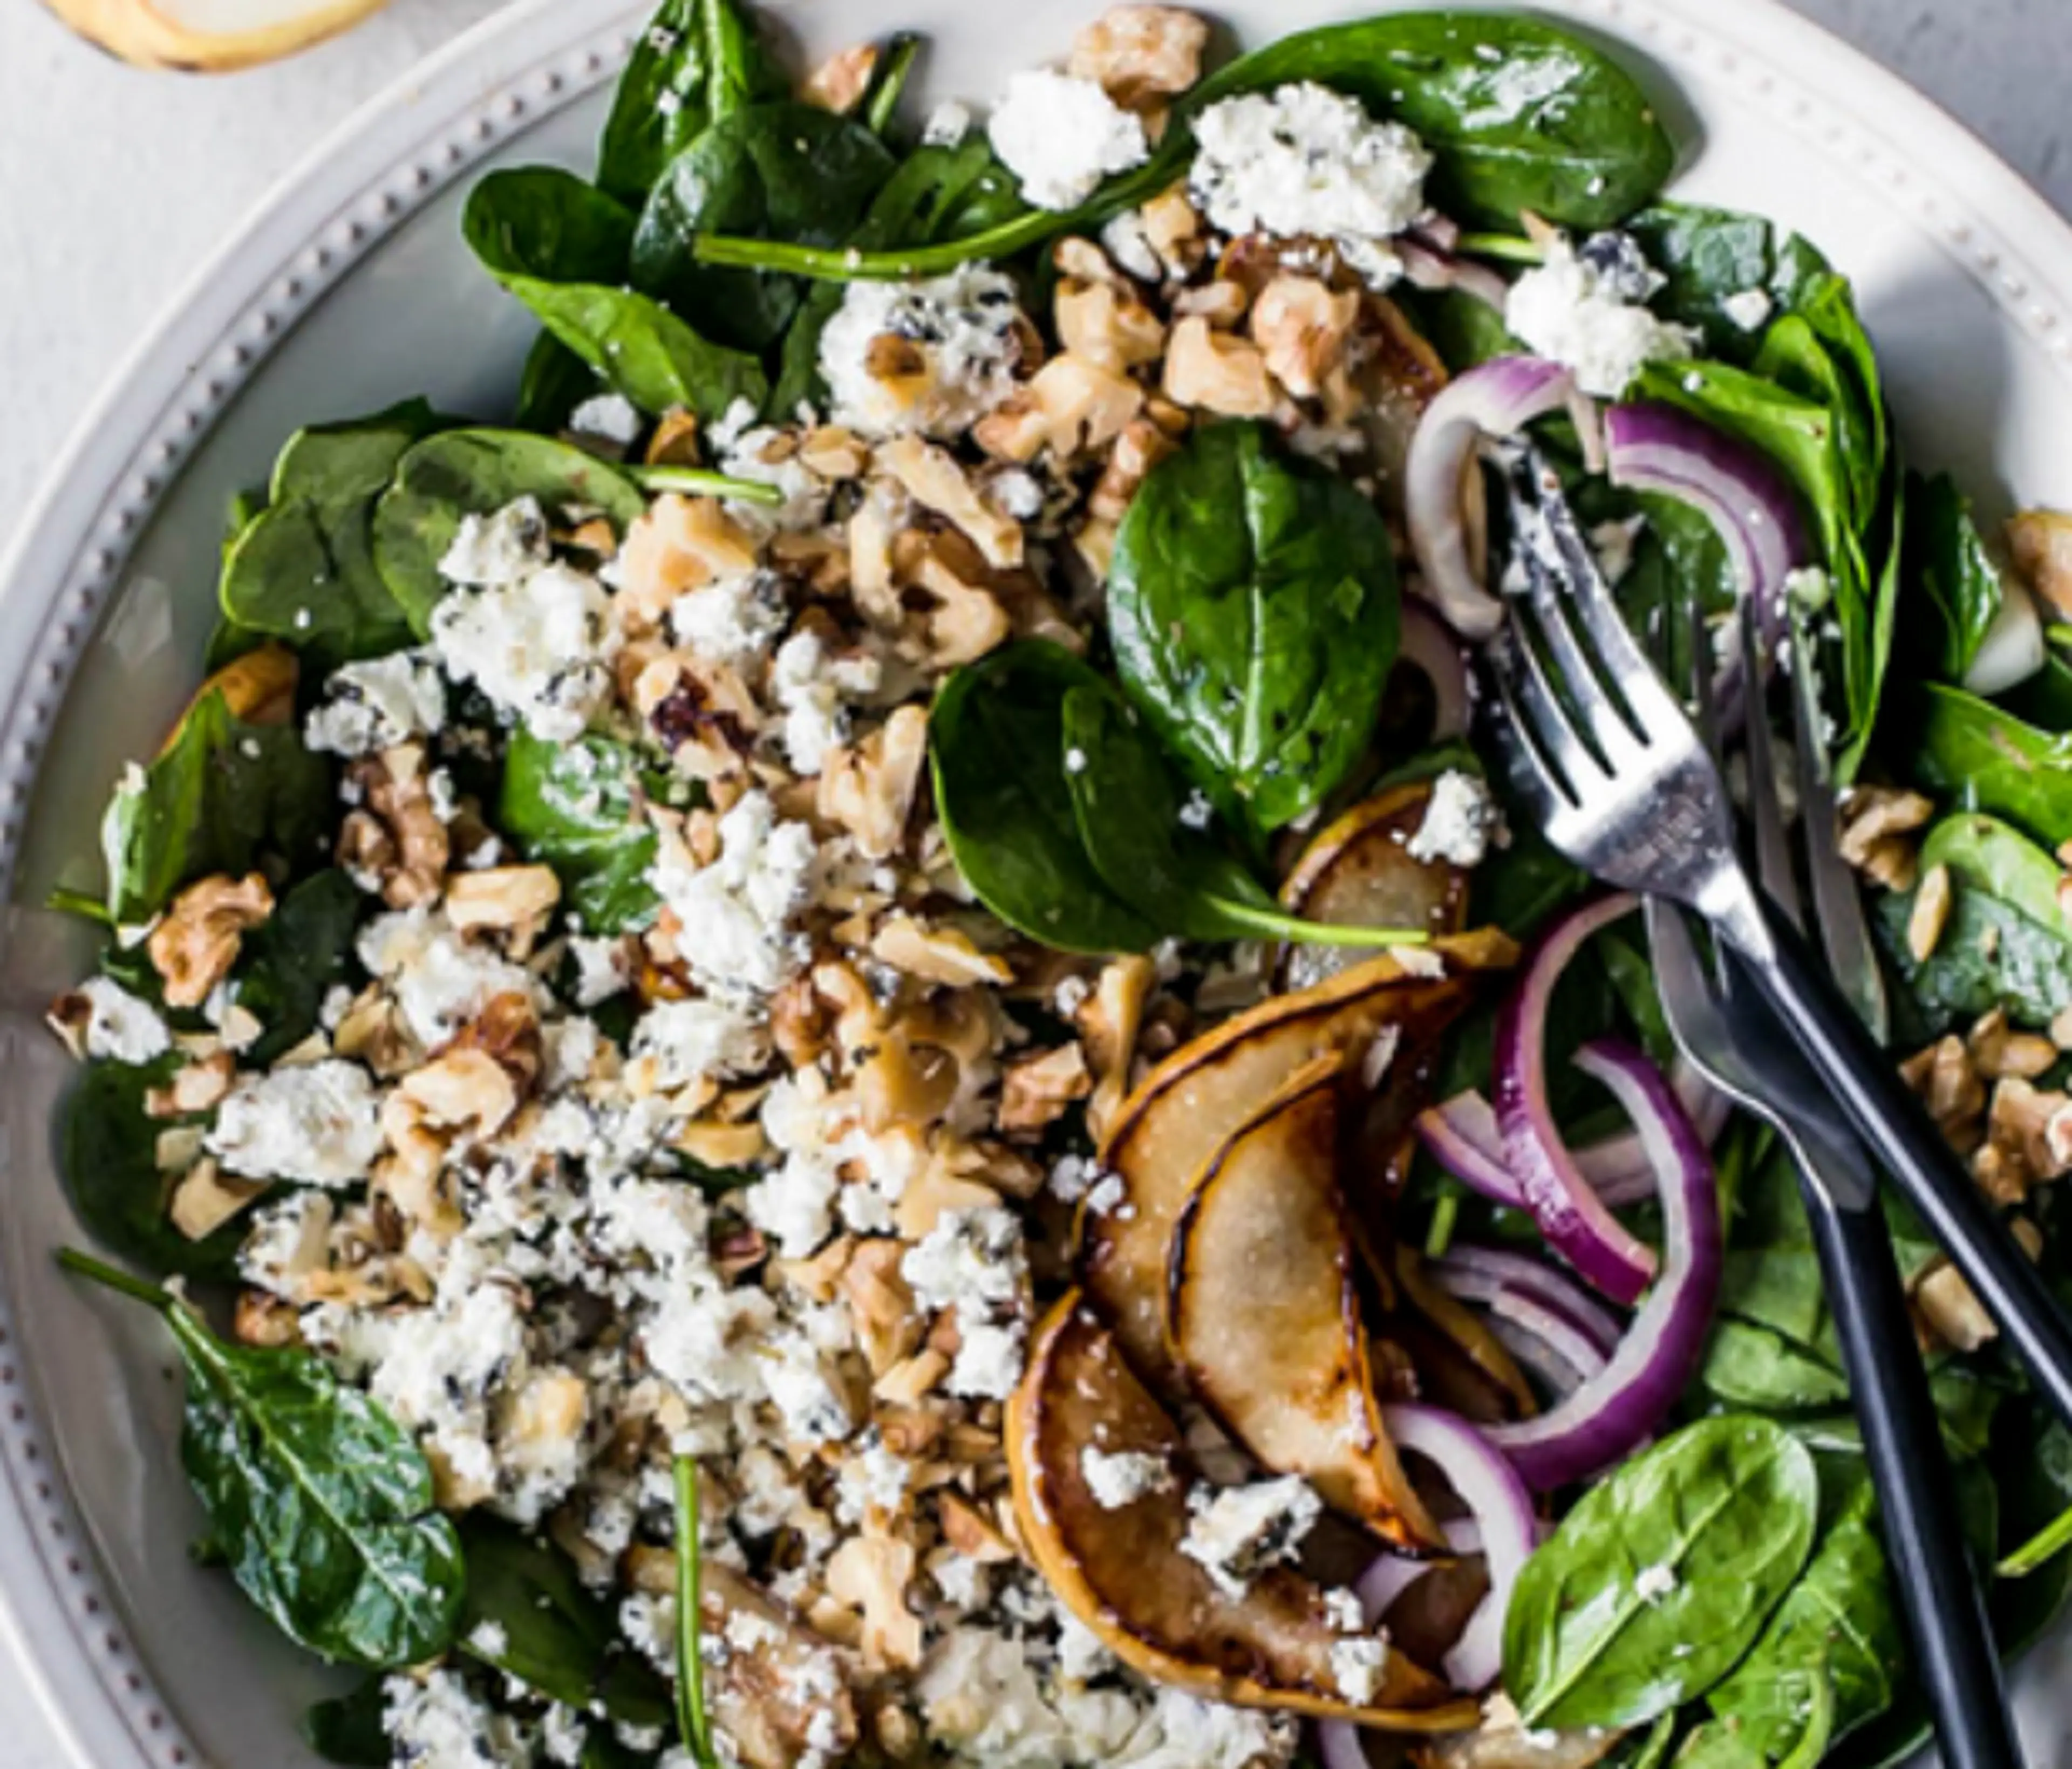 Steak Tips with Spinach and pear salad with goat cheese